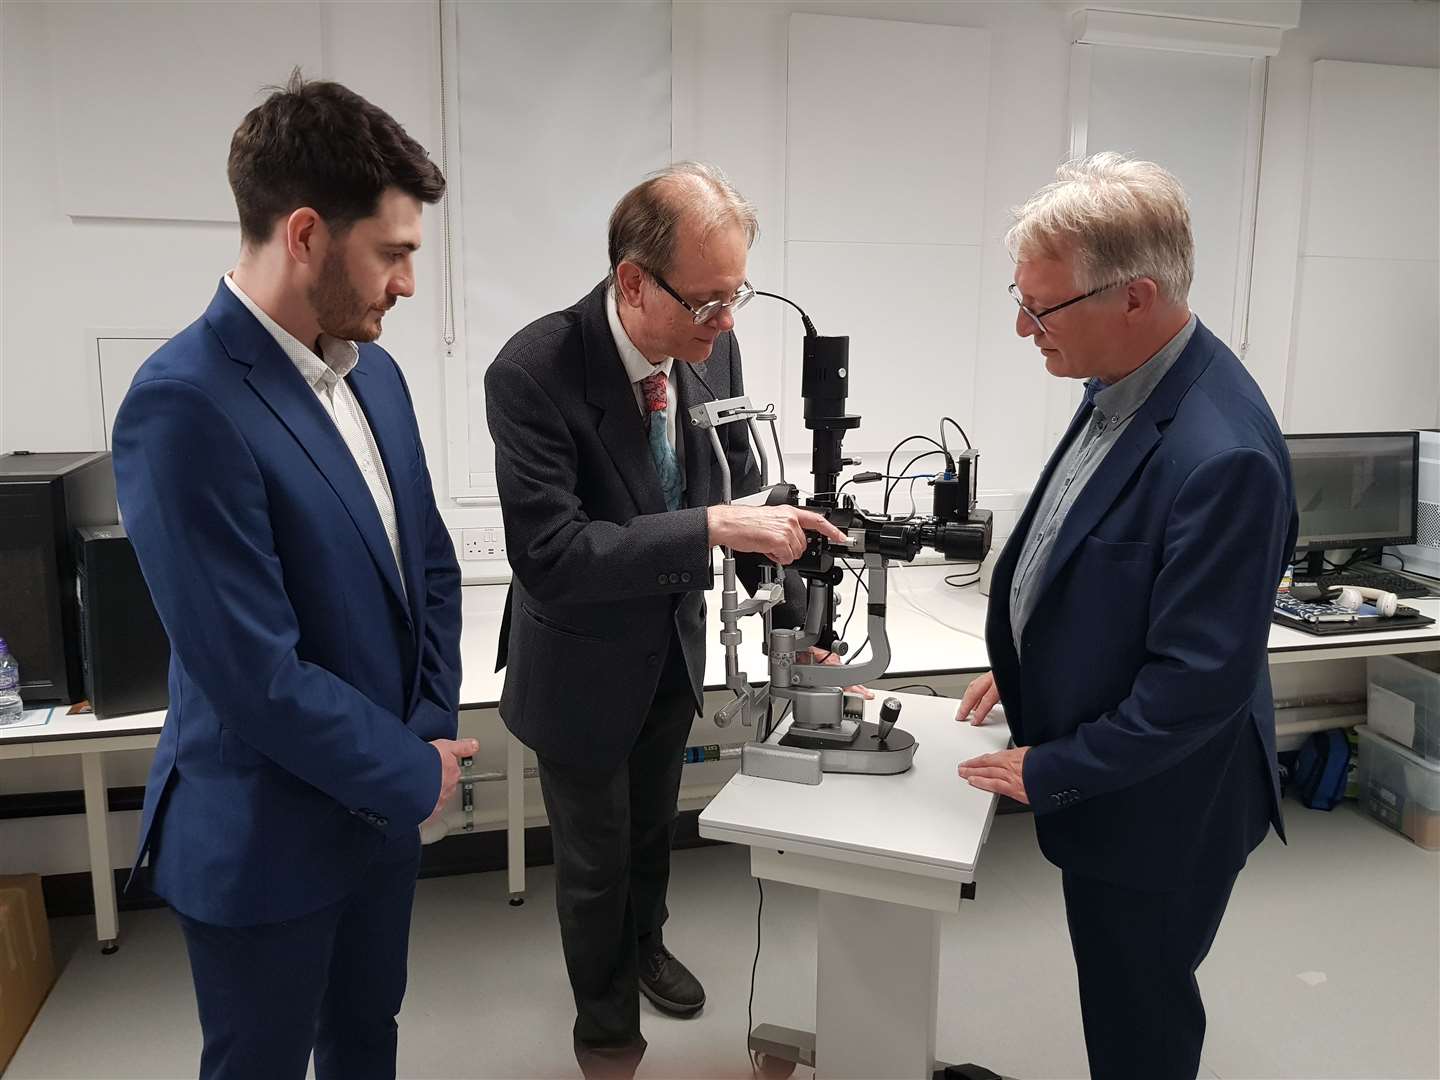 Dr Mario Giardini demonstrates the device with Jamie Thomson and Jan Boers from medical devices company IDCP (University of Strathclyde/PA)